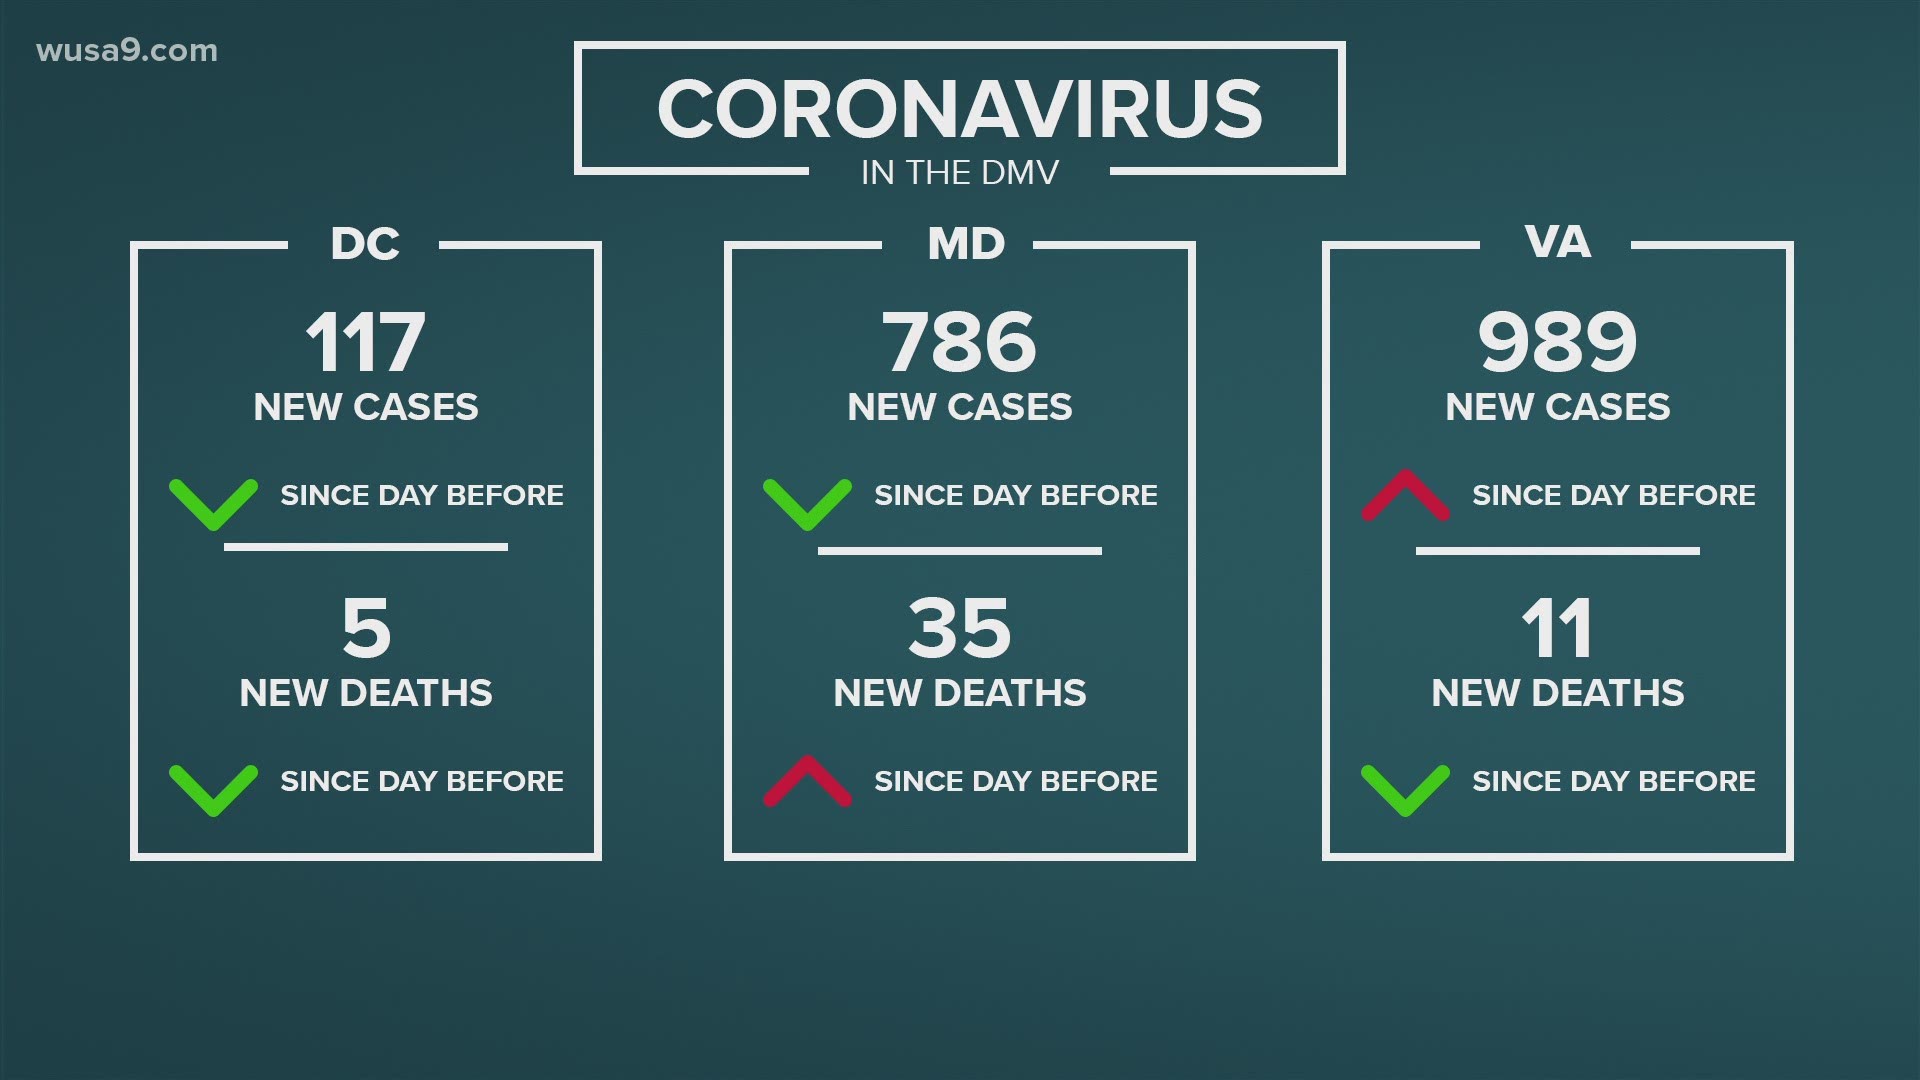 The coronavirus impact on the DMV continues to grow. Here are the latest updates.